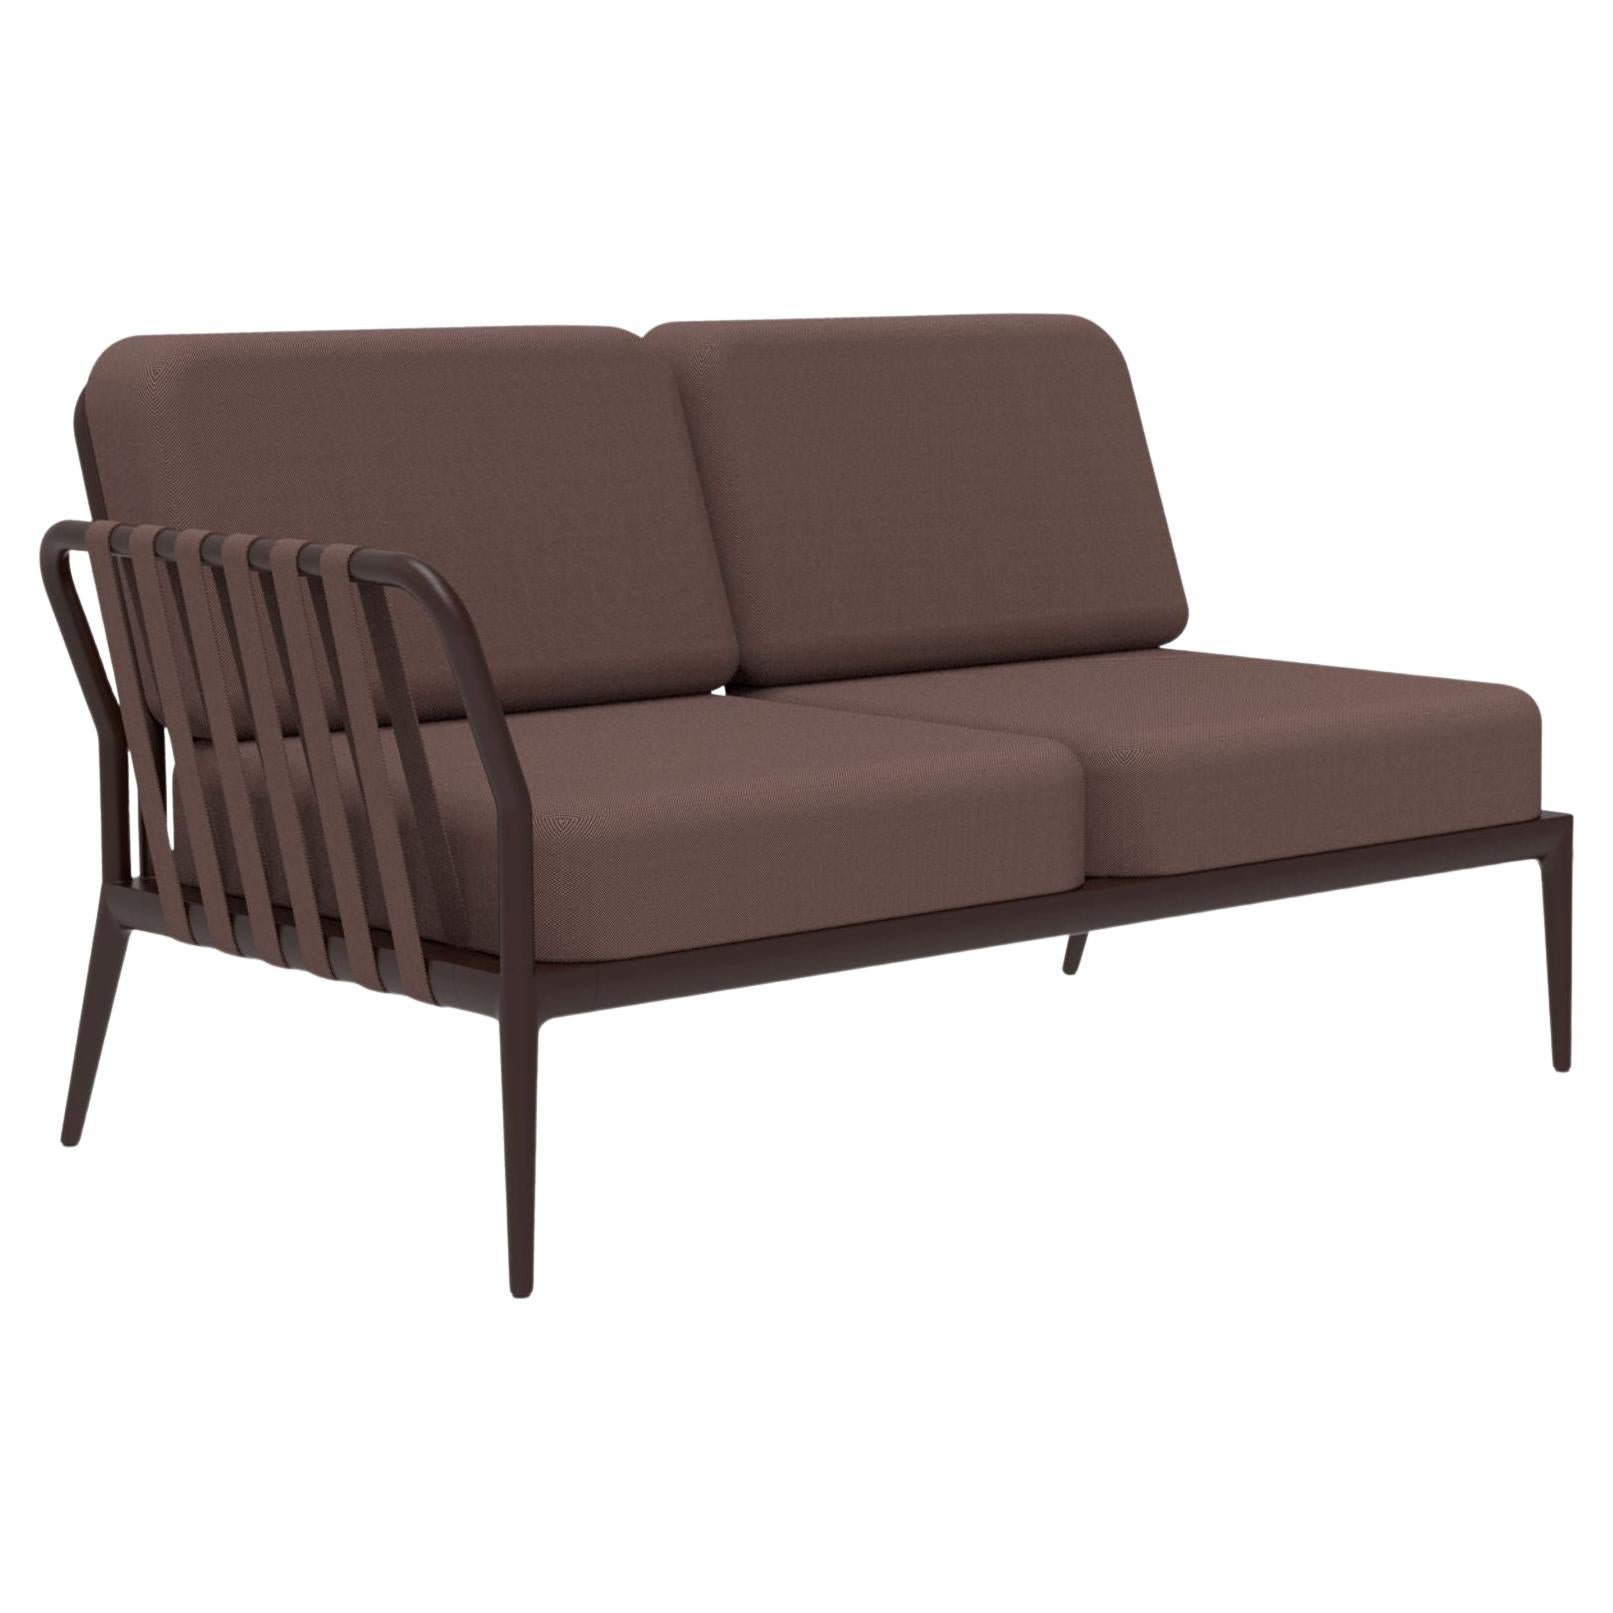 Ribbons Chocolate Double Right Modular Sofa by Mowee